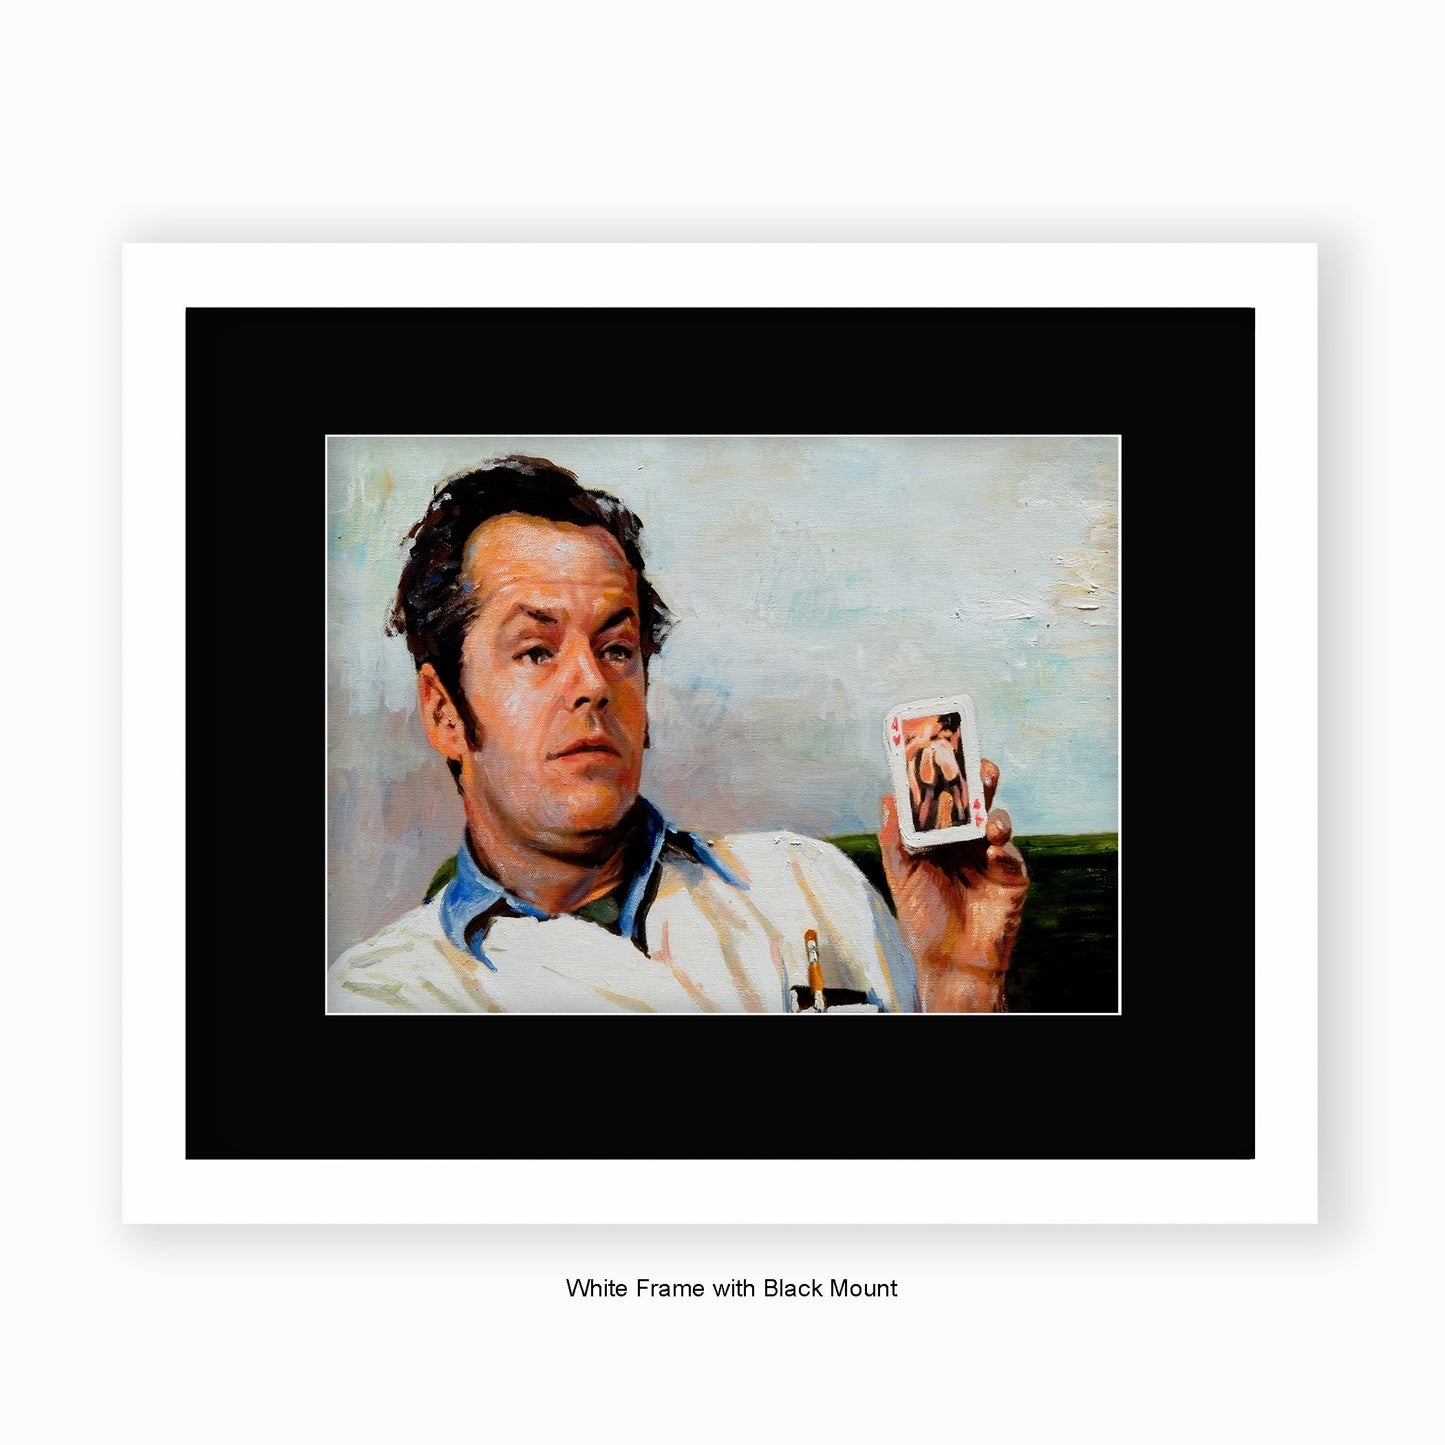 One Flew Over the Cuckoo's Nest - Jack Nicholson - Mounted & Framed Art Print